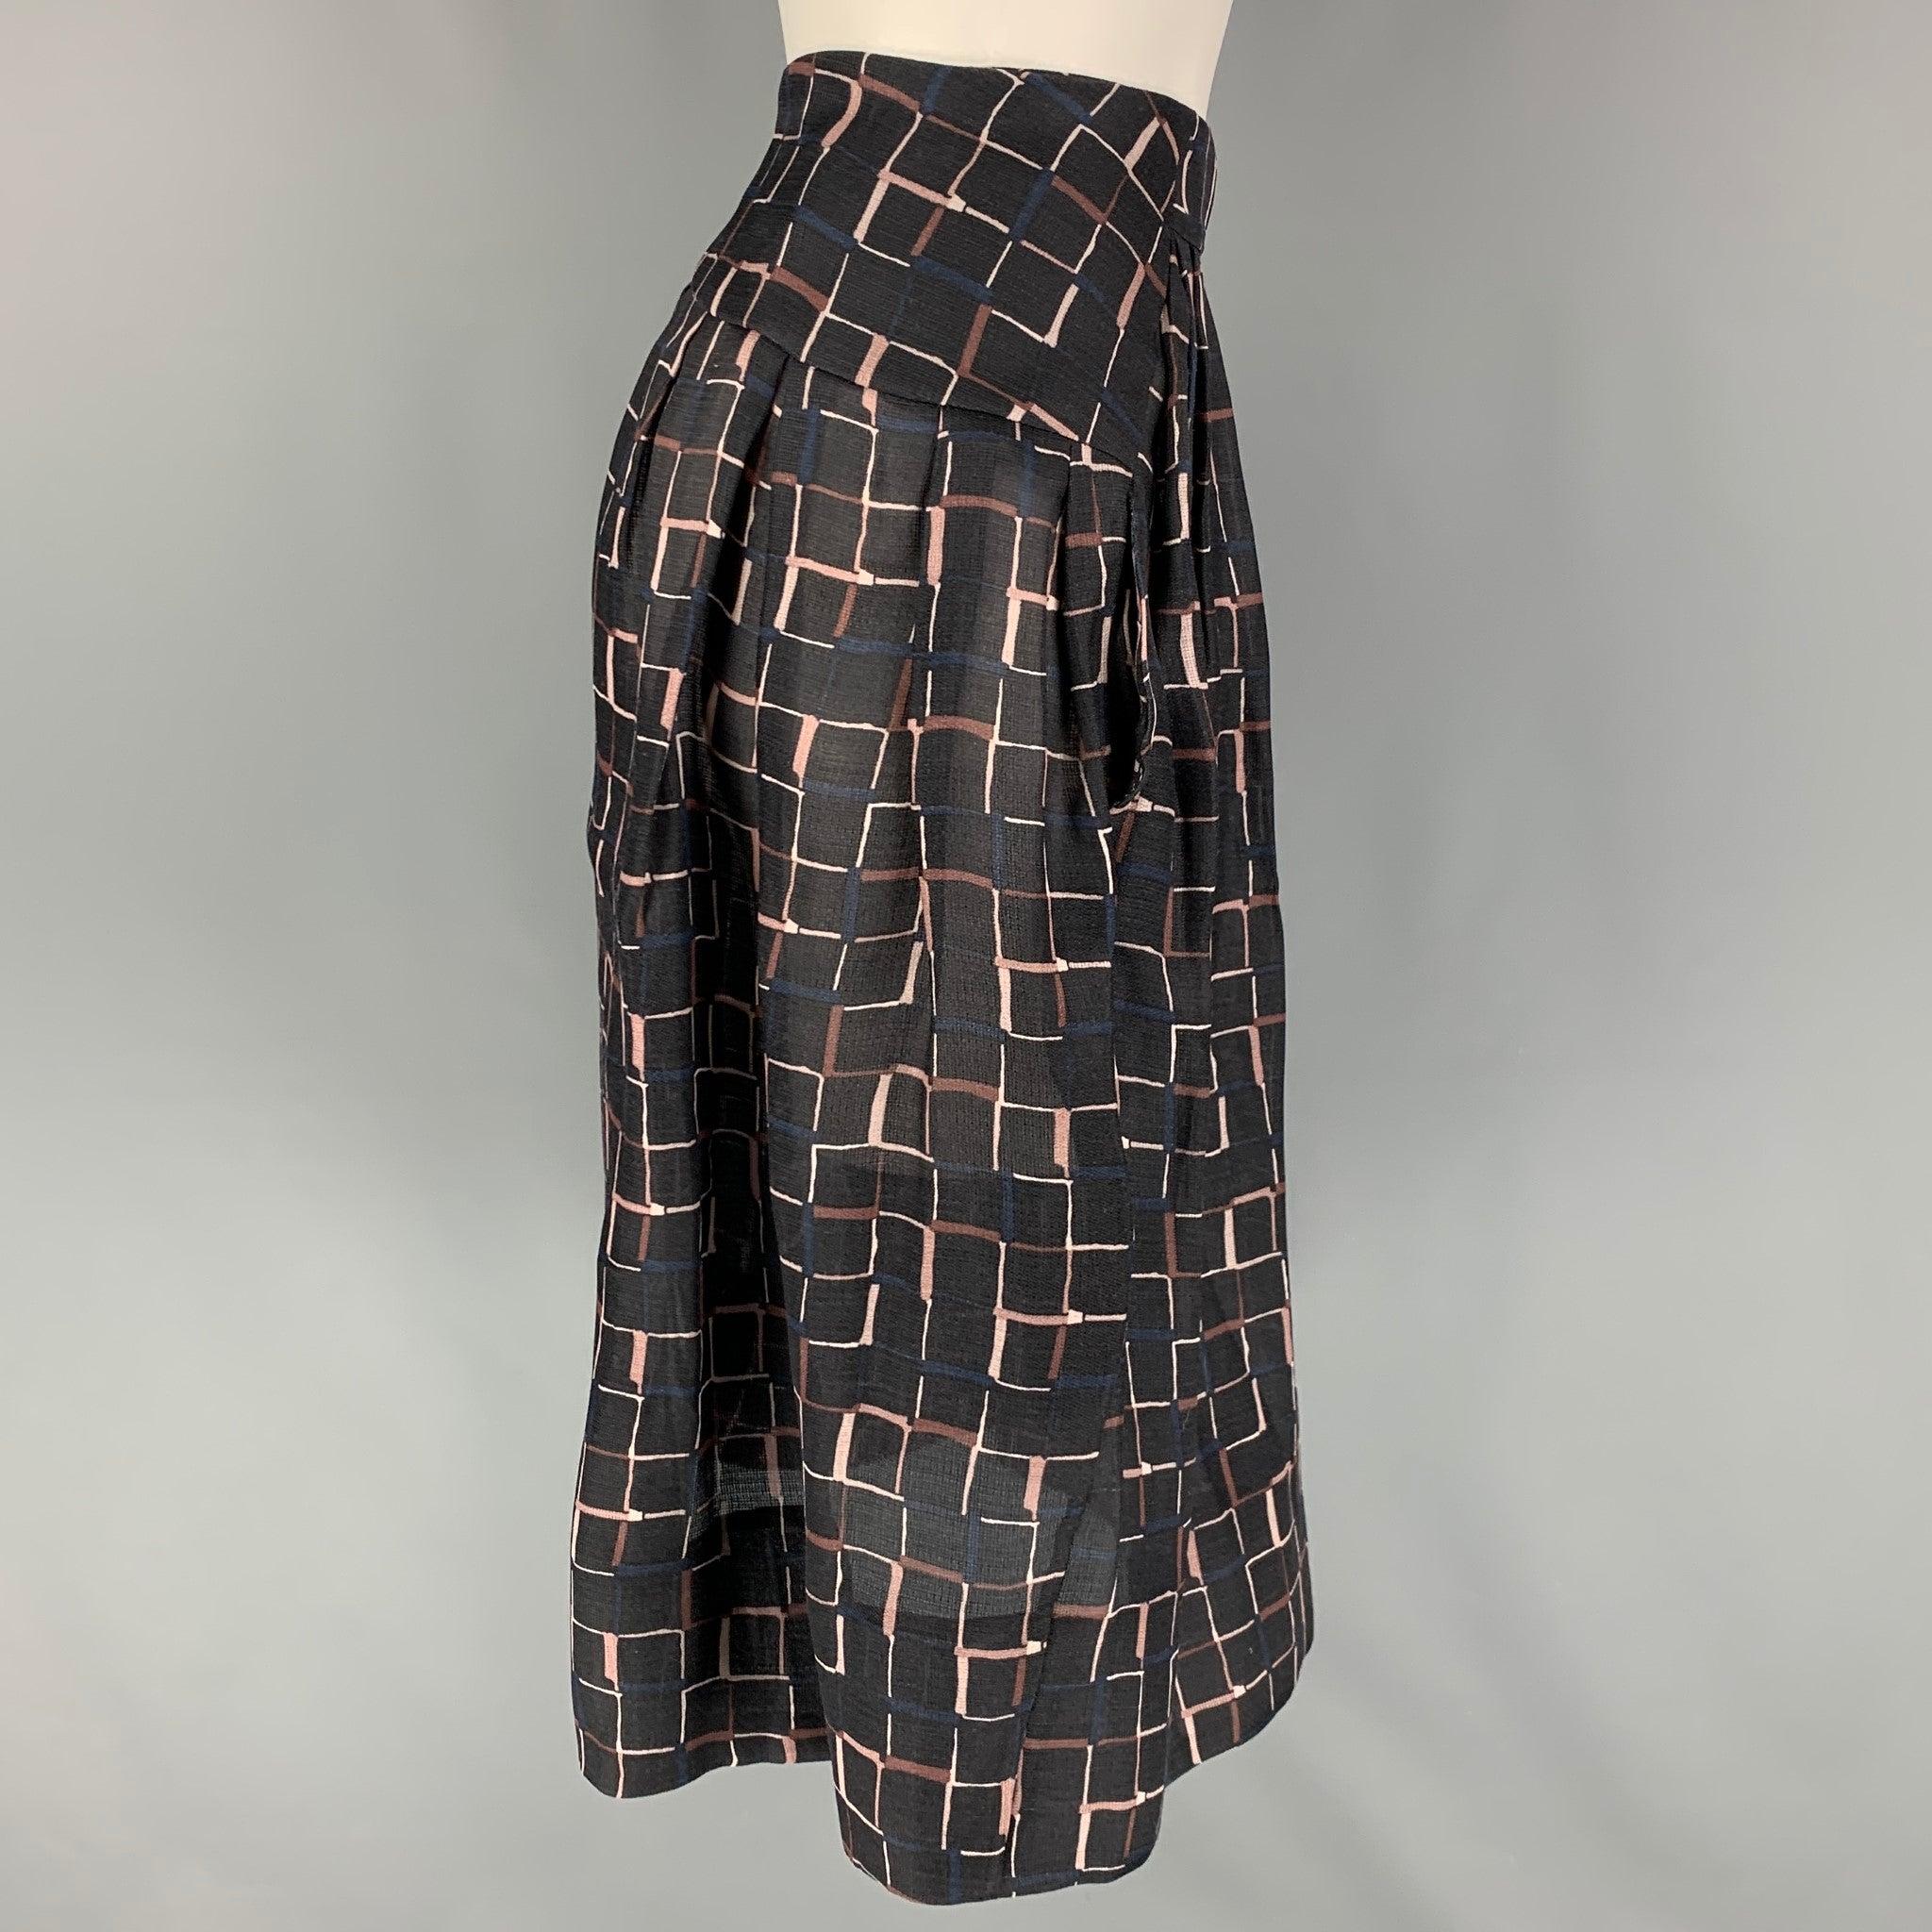 MARNI skirt comes in a black & taupe print wool 
featuring a pleated style and a back zipper closure. Made in Italy.
Very Good
Pre-Owned Condition. 

Marked:   42 

Measurements: 
  Waist: 28 inches  Hip: 42 inches  Length: 25.5 inches 
  
  
